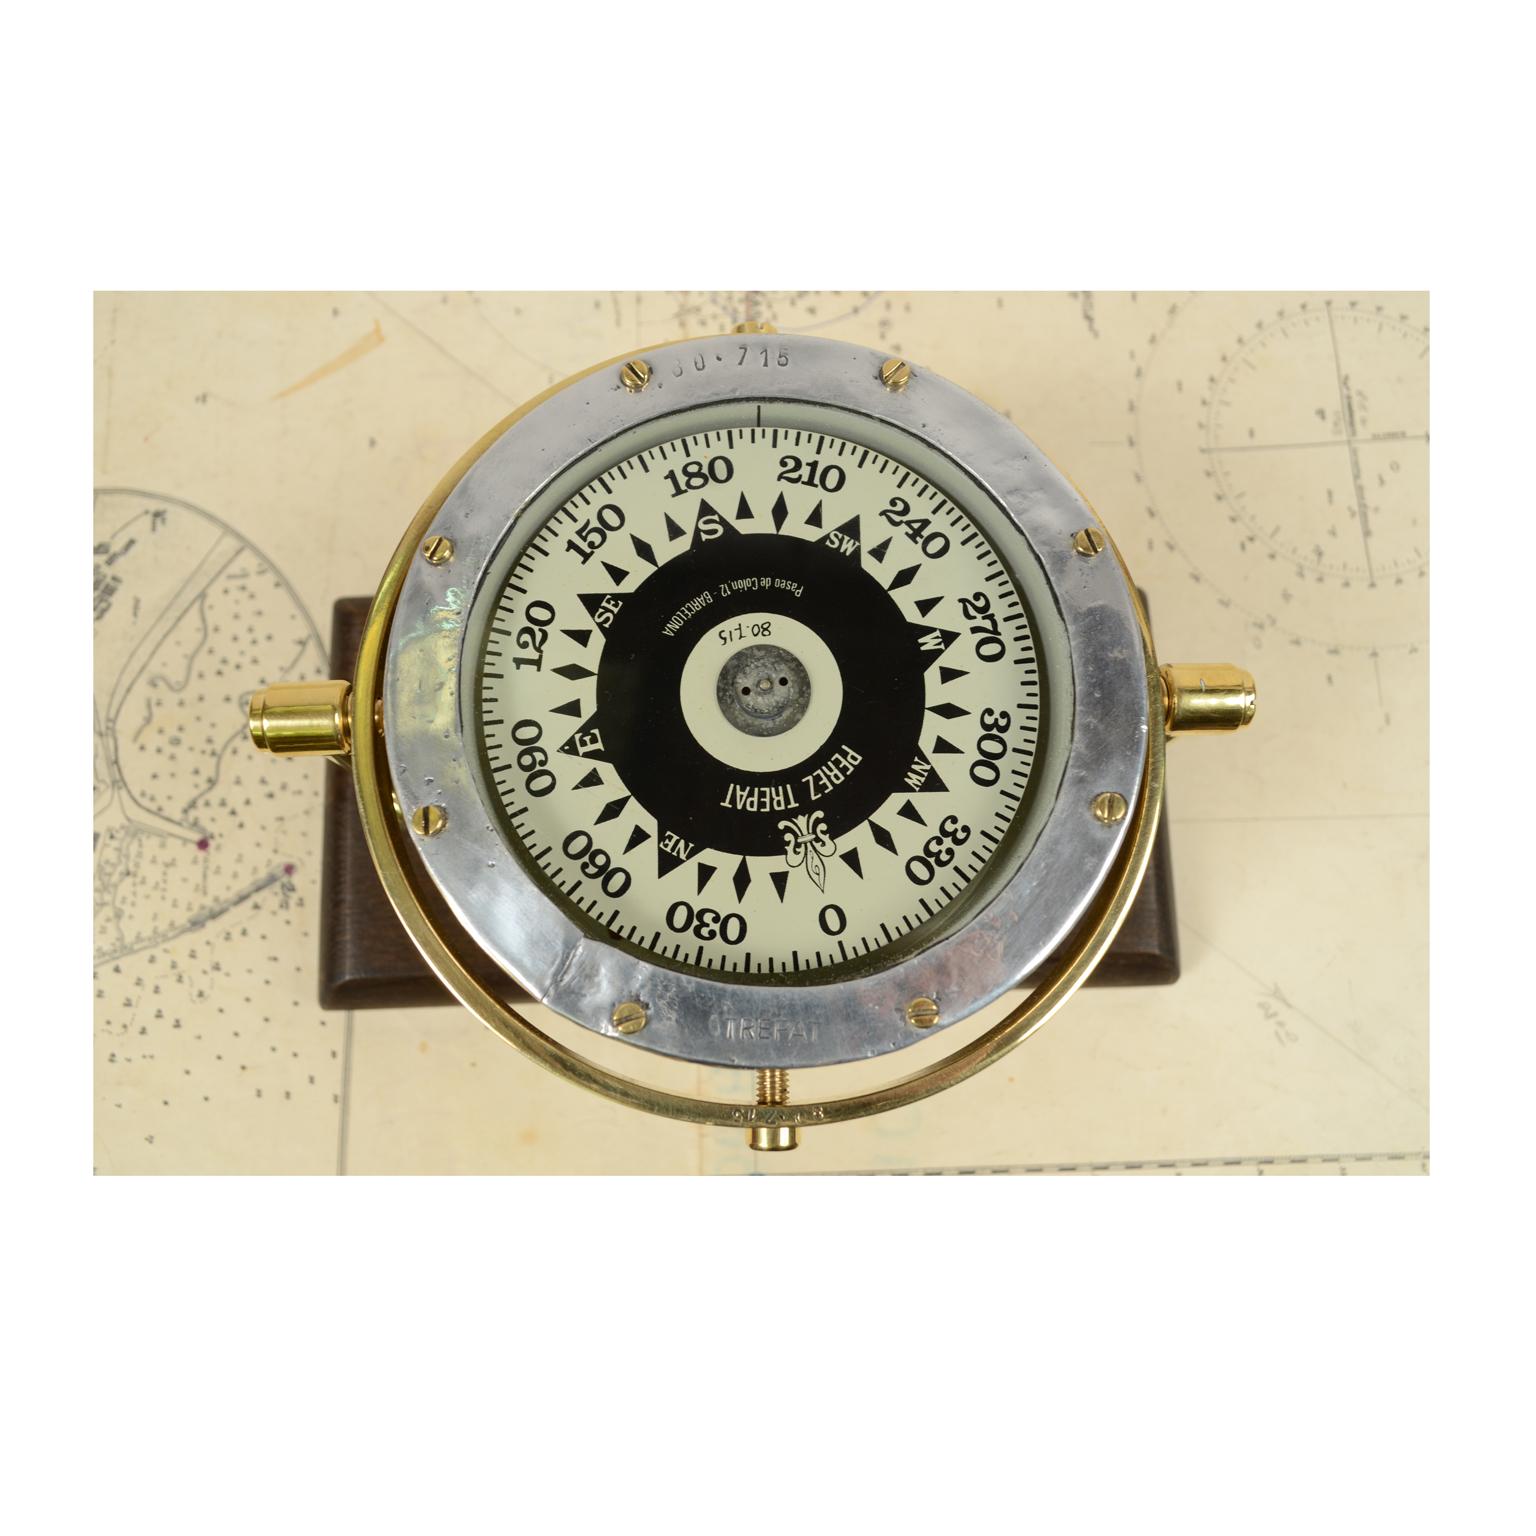 Brass nautical compass on universal joint mounted on wooden board. Spanish manufacture of the 1940s, signed Peraz Trepaz Barcelona. Very good condition. Board 22 x 10.5 cm, total height 13 cm.
Shipping insured by Lloyd's London; it is available our